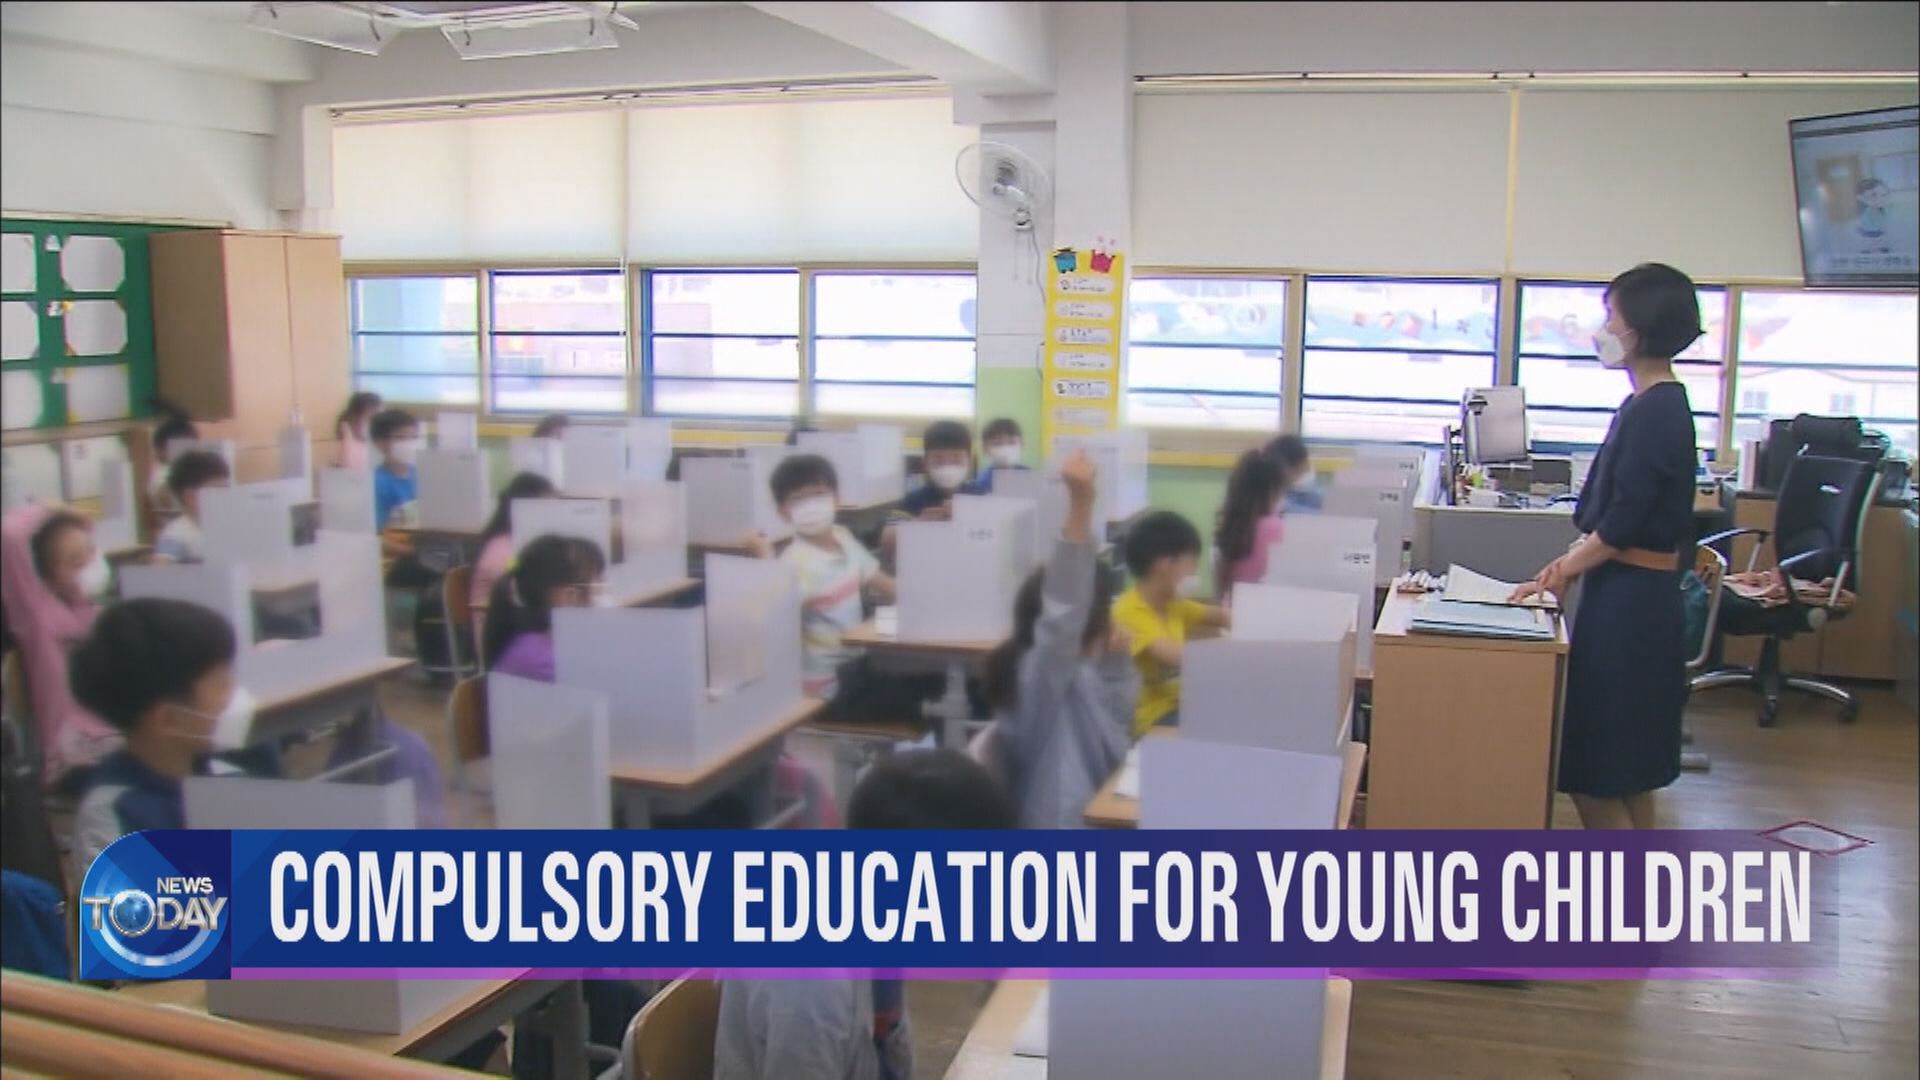 COMPULSORY EDUCATION FOR YOUNG CHILDREN